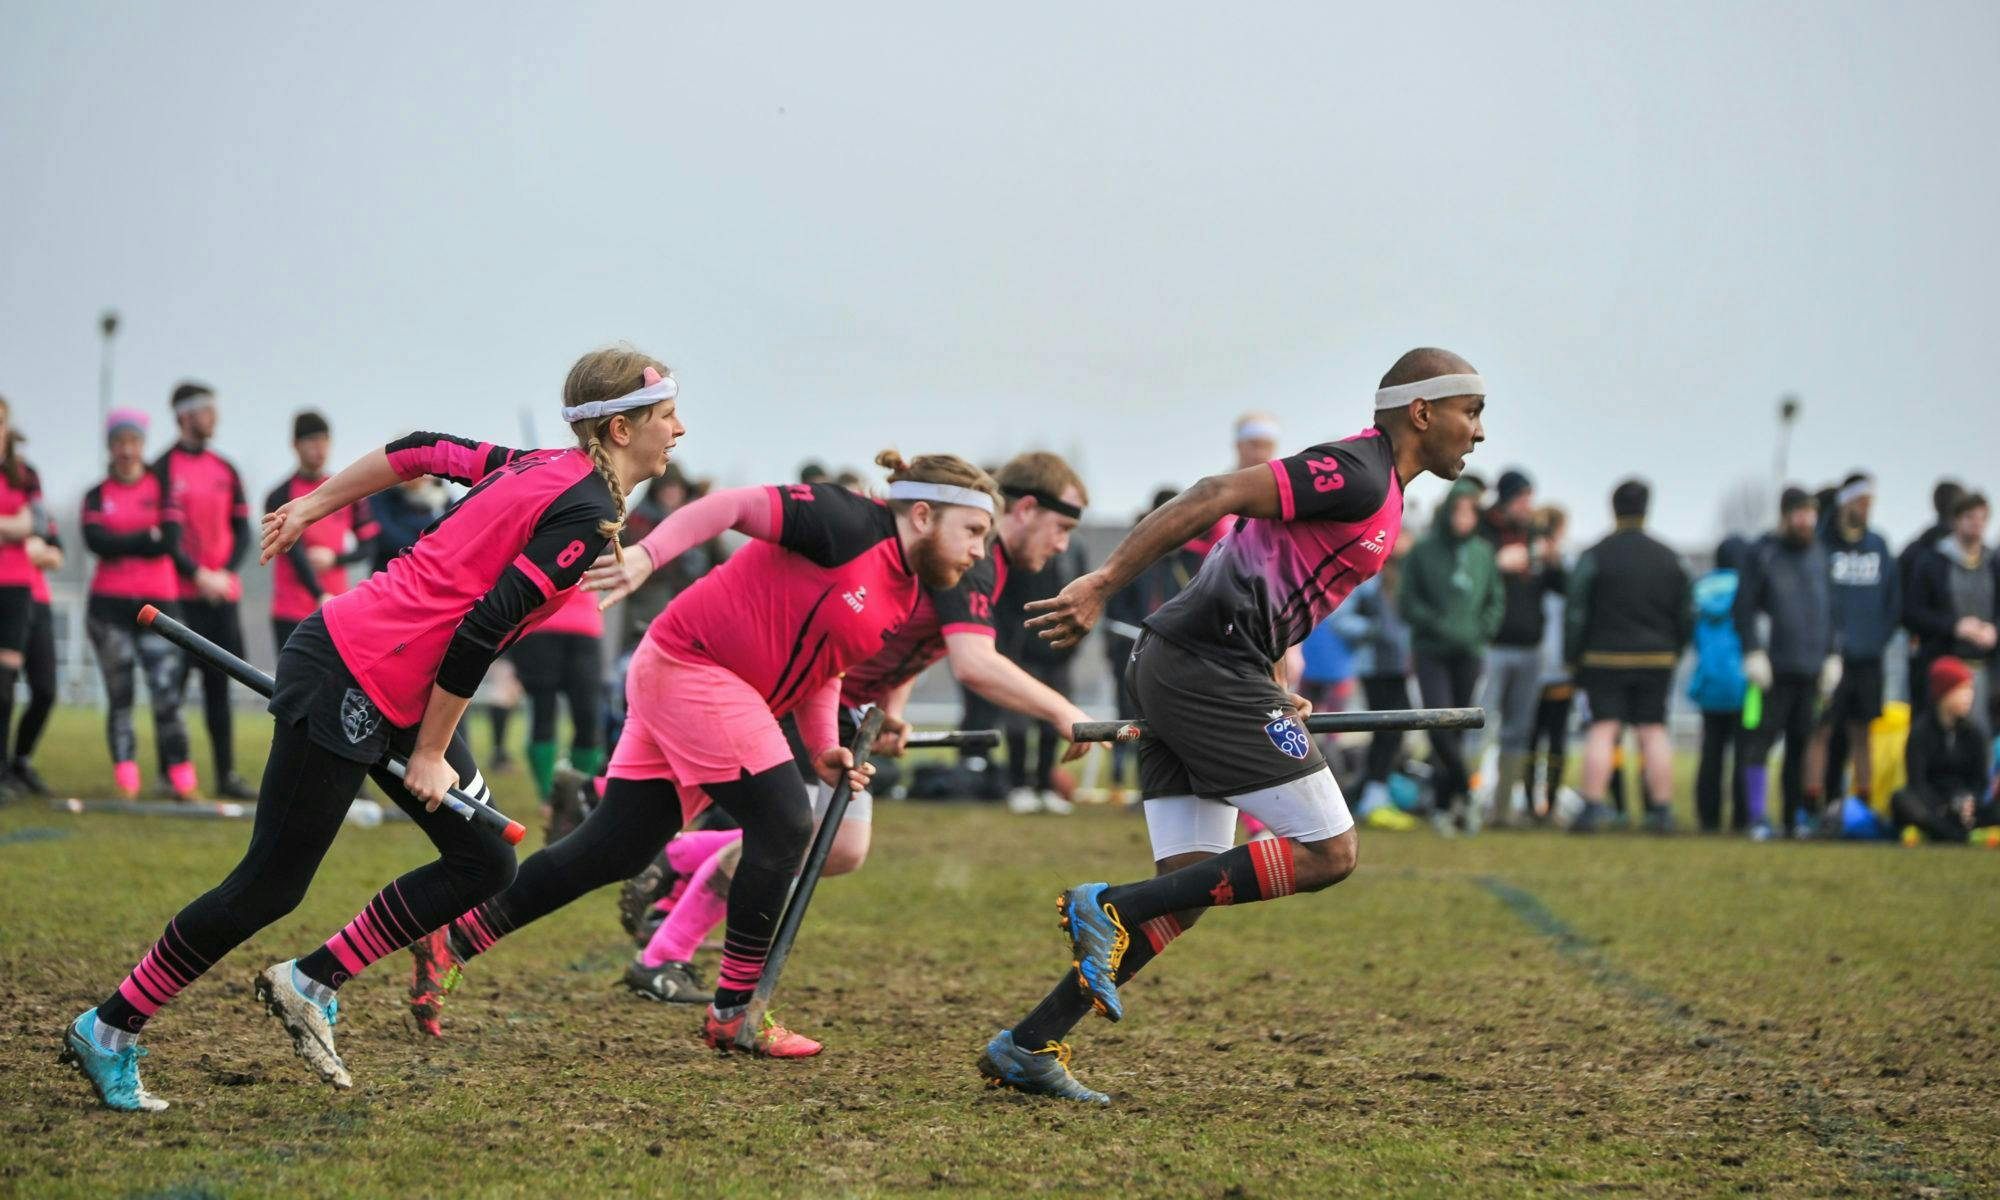 Velociraptors QC players run to the halfway line in a brooms up